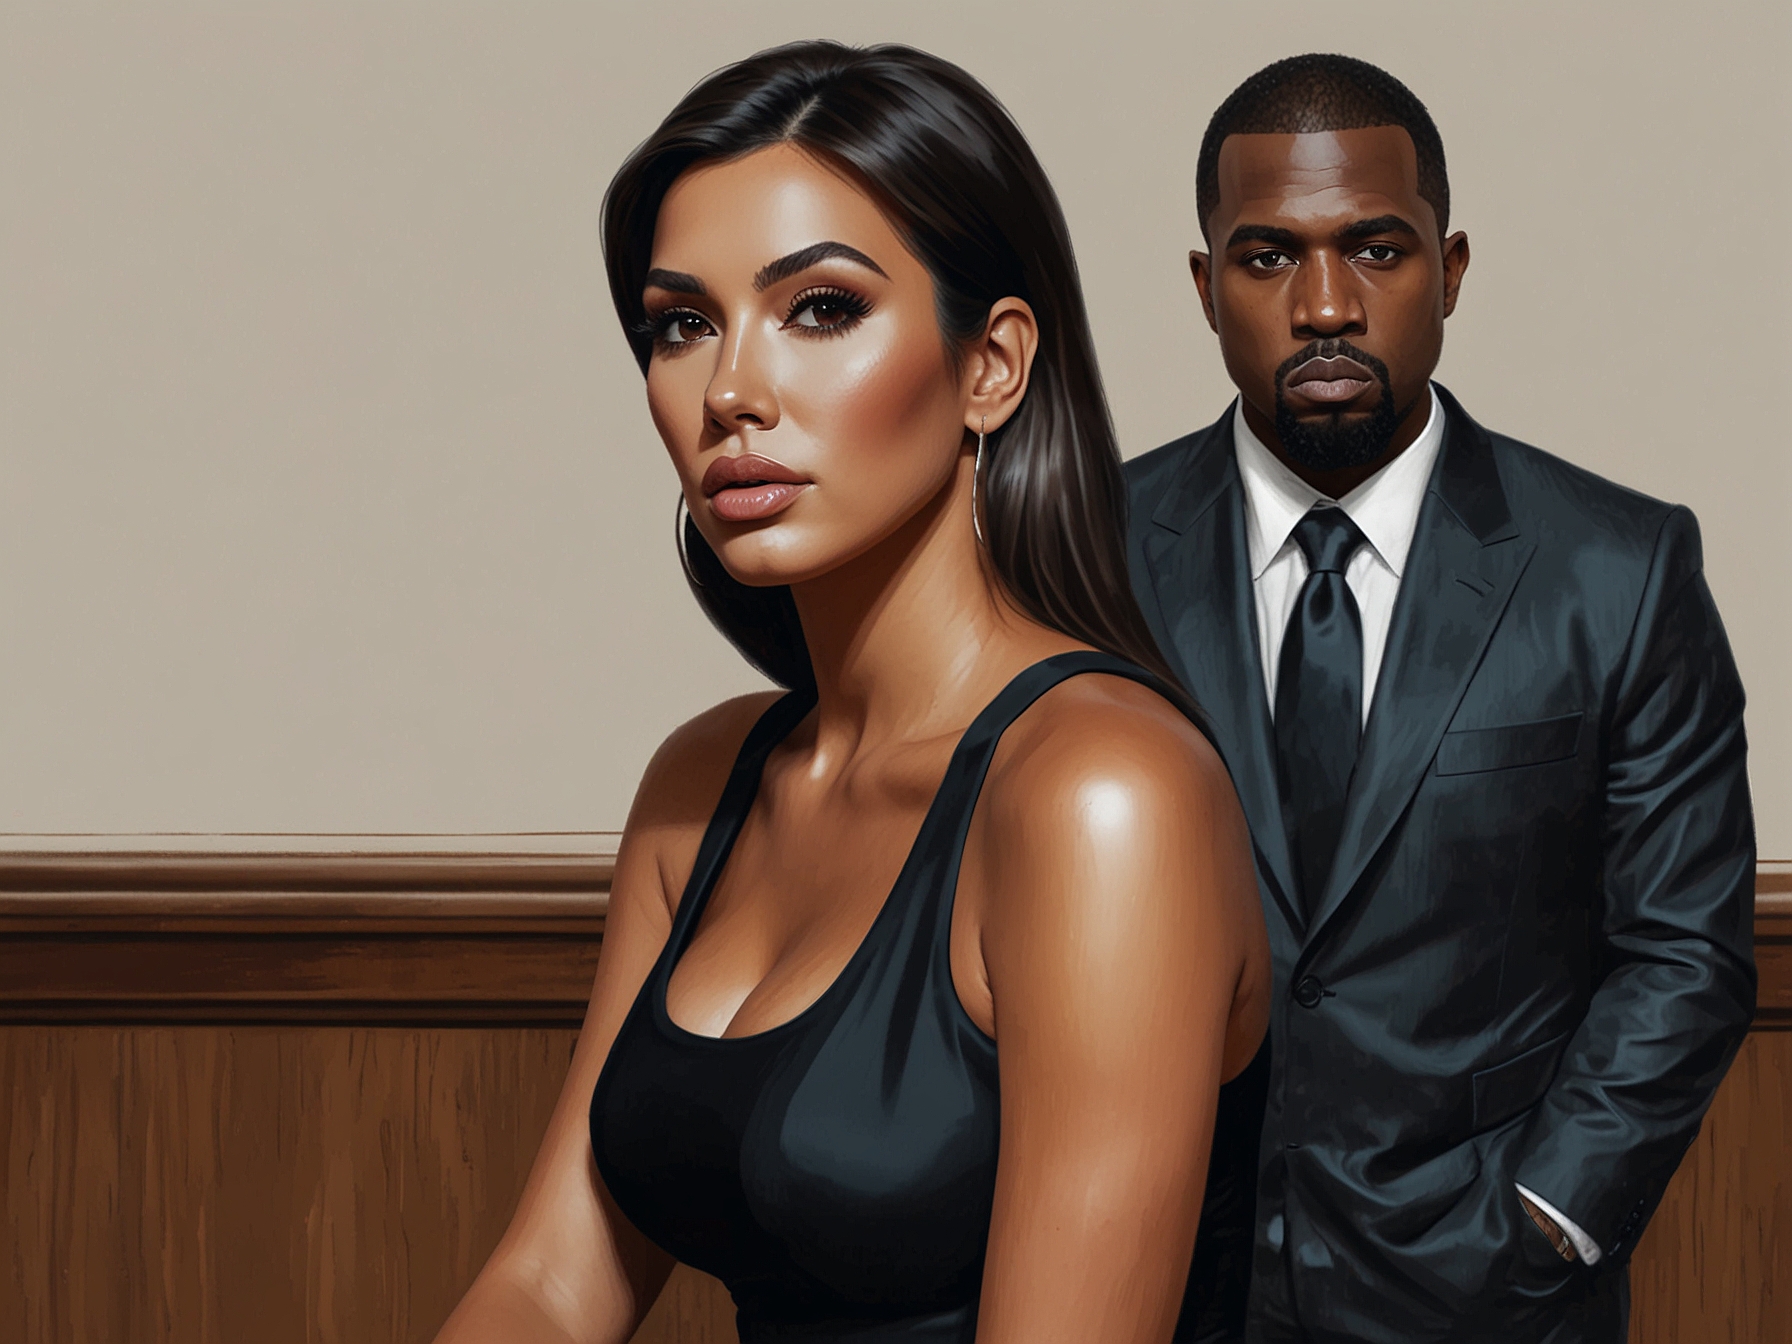 Kim Kardashian, looking sophisticated and focused, ignoring the Father's Day celebrations on social media, which drew attention due to her high-profile past with Kanye West.